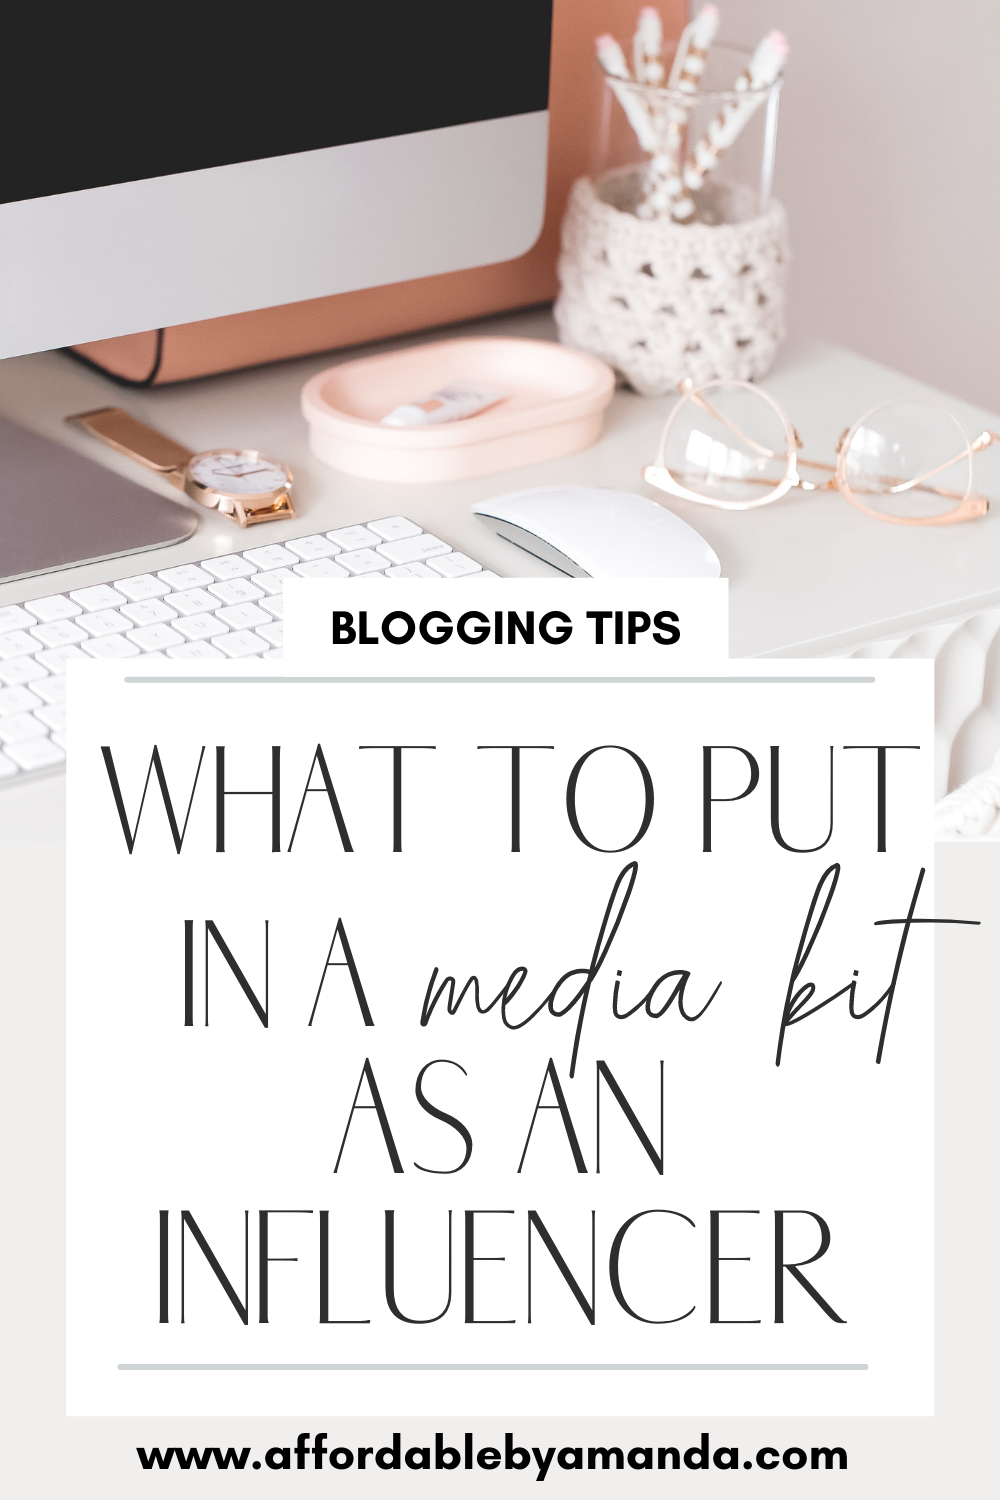 Media Kit Examples for Influencers | Step By Step Guide: What To Put In a Media Kit in 2021 | Affordable by Amanda